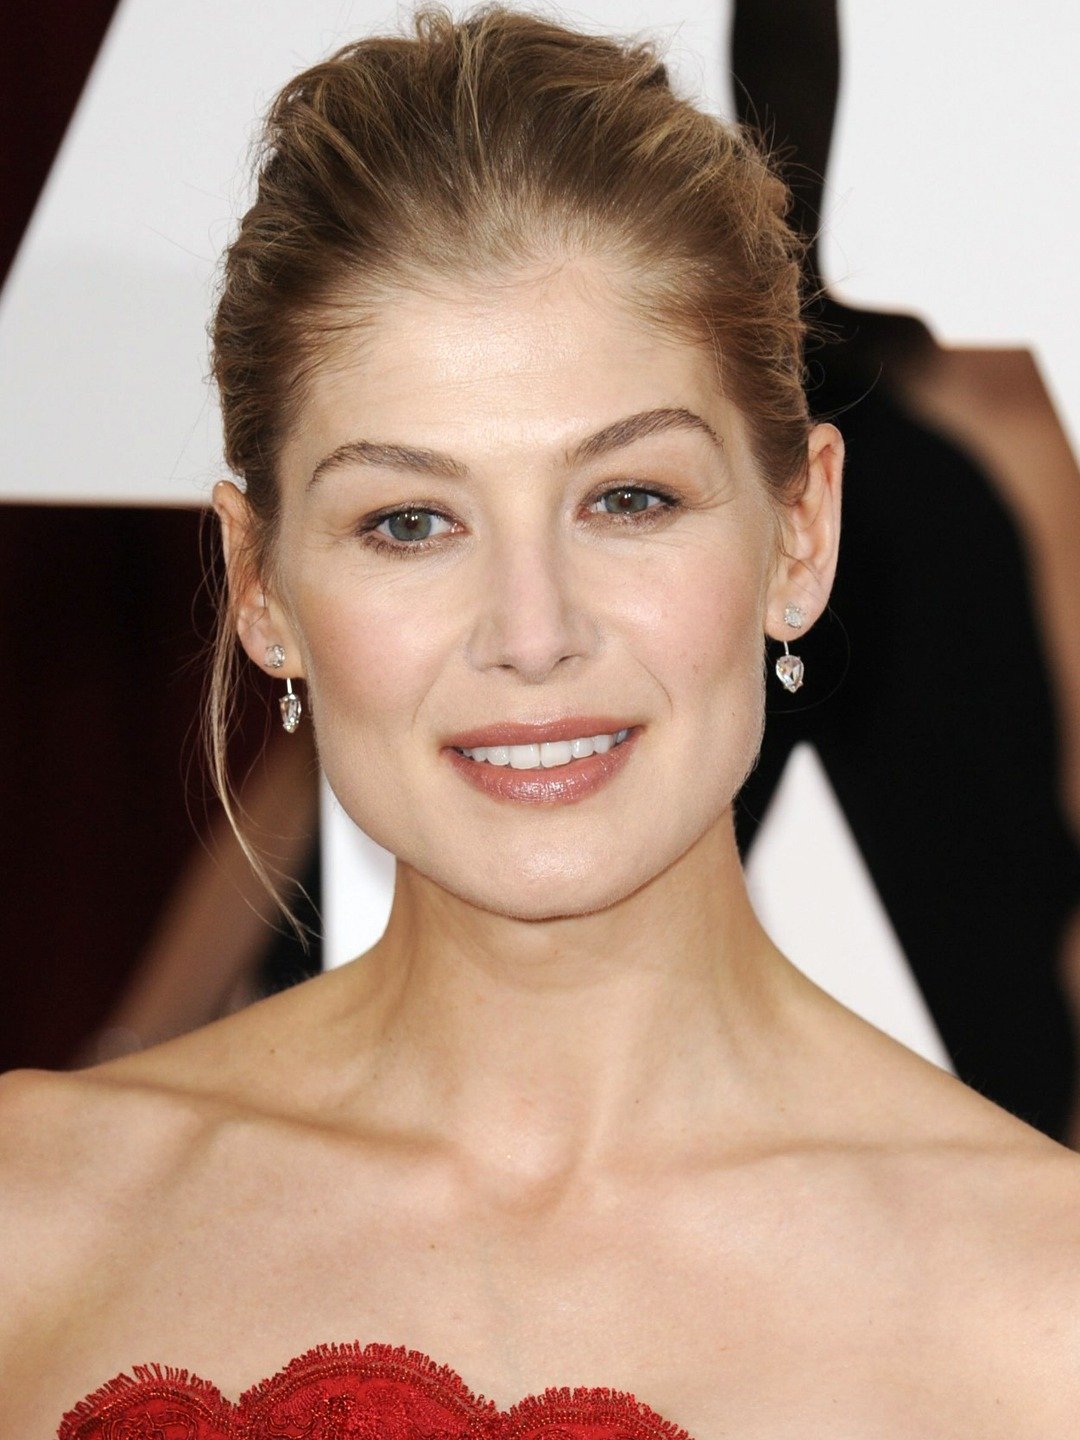 How tall is Rosamund Pike?